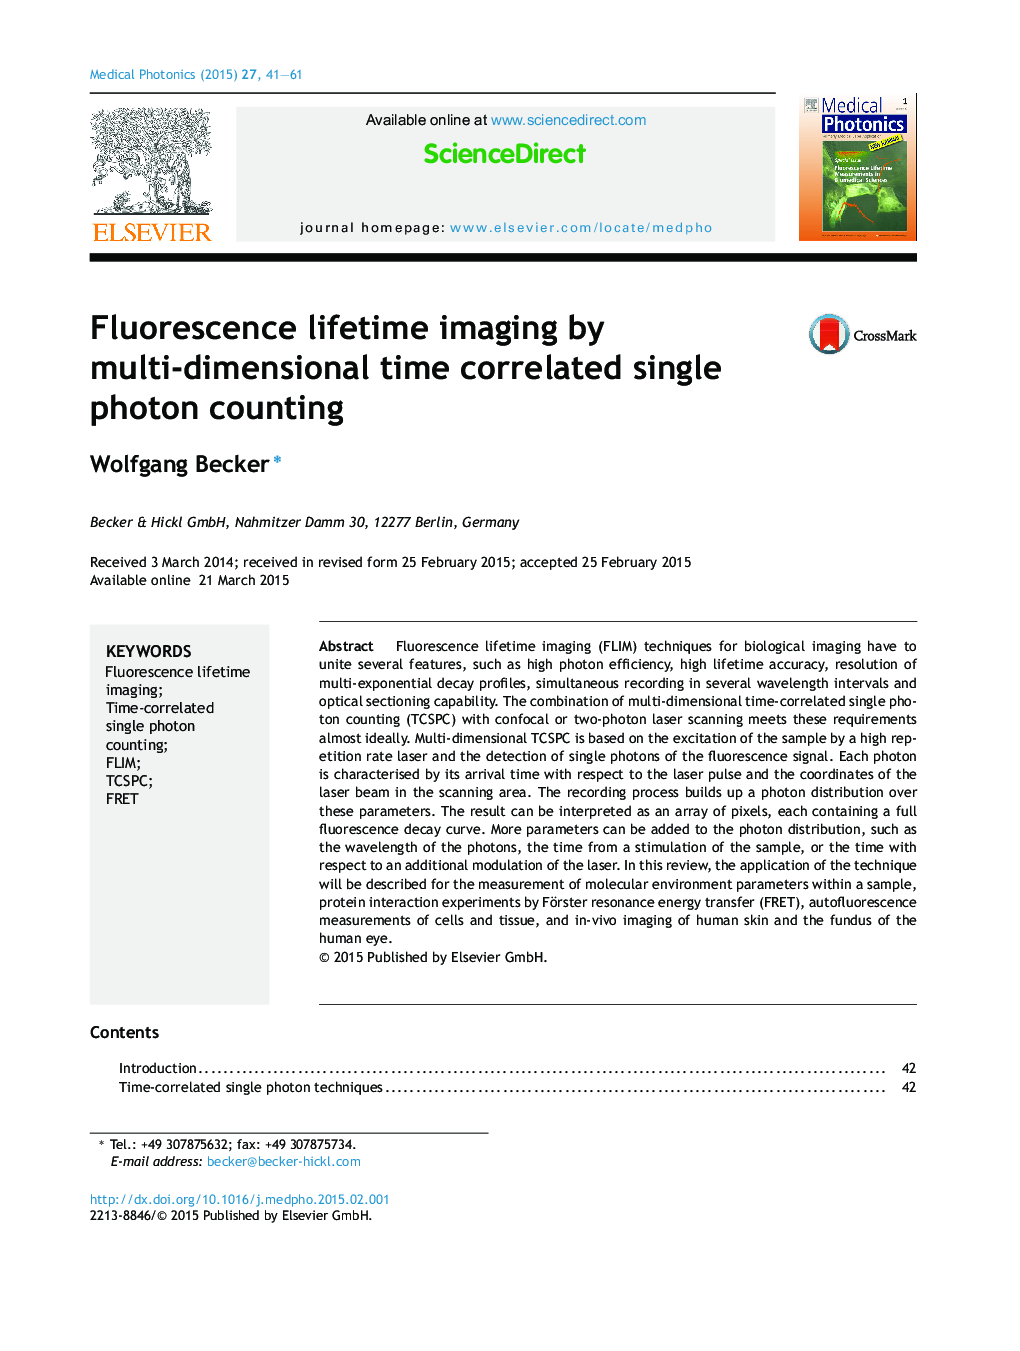 Fluorescence lifetime imaging by multi-dimensional time correlated single photon counting